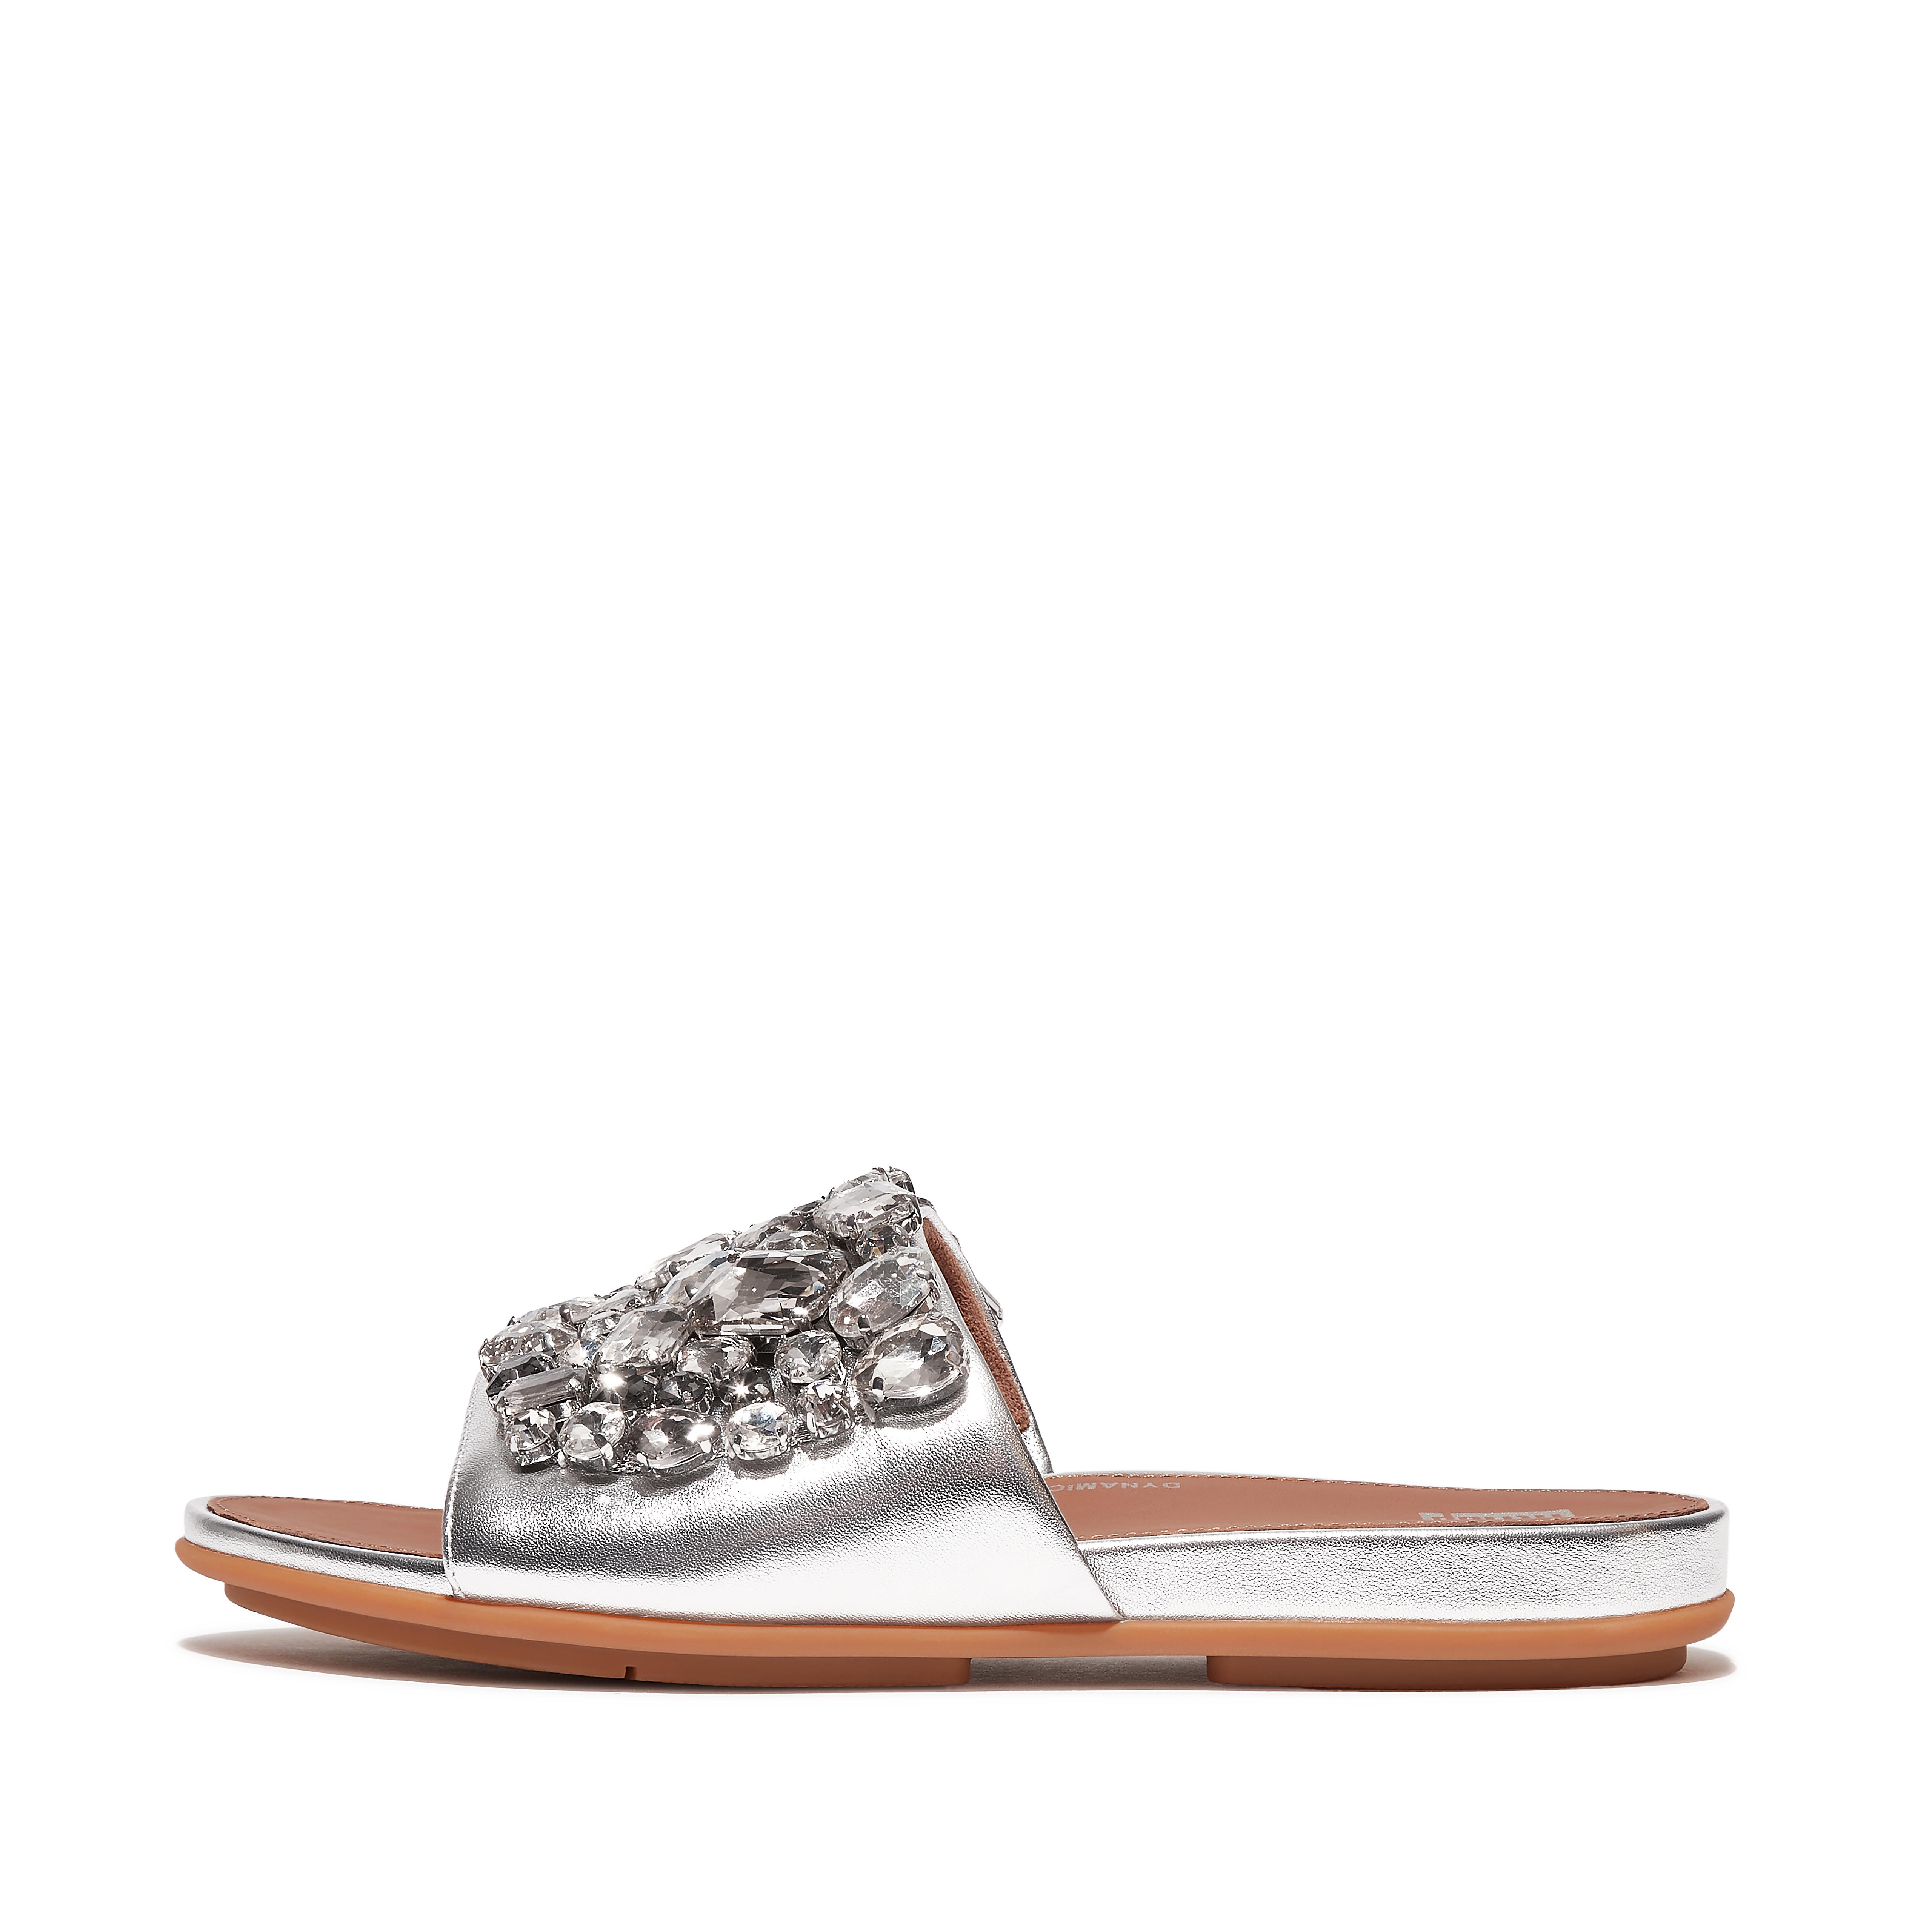 Fitflop Jewel-Deluxe Metallic-Leather Slides,Silver